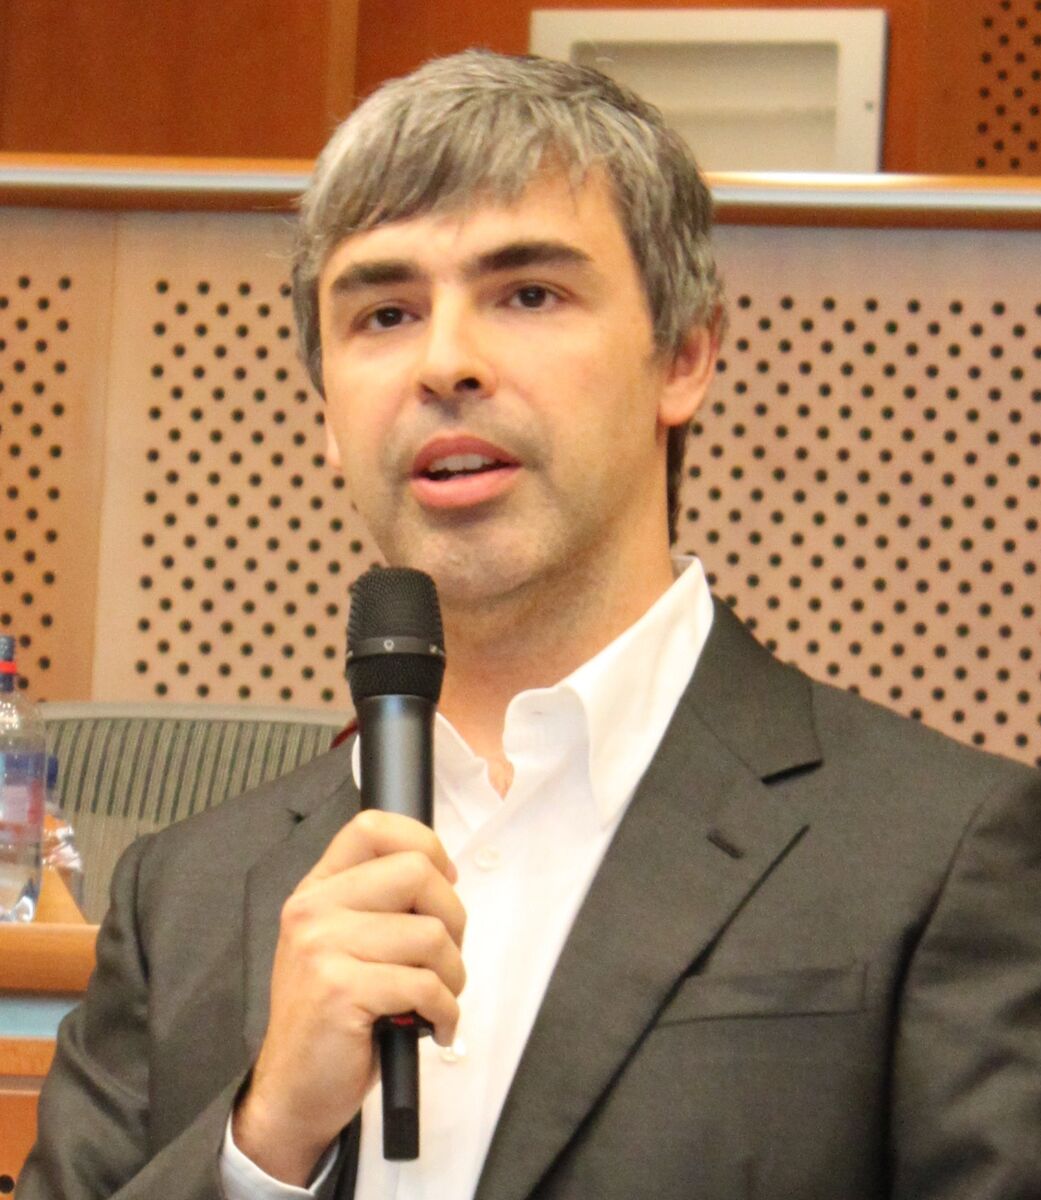 Larry Page - Famous Businessperson